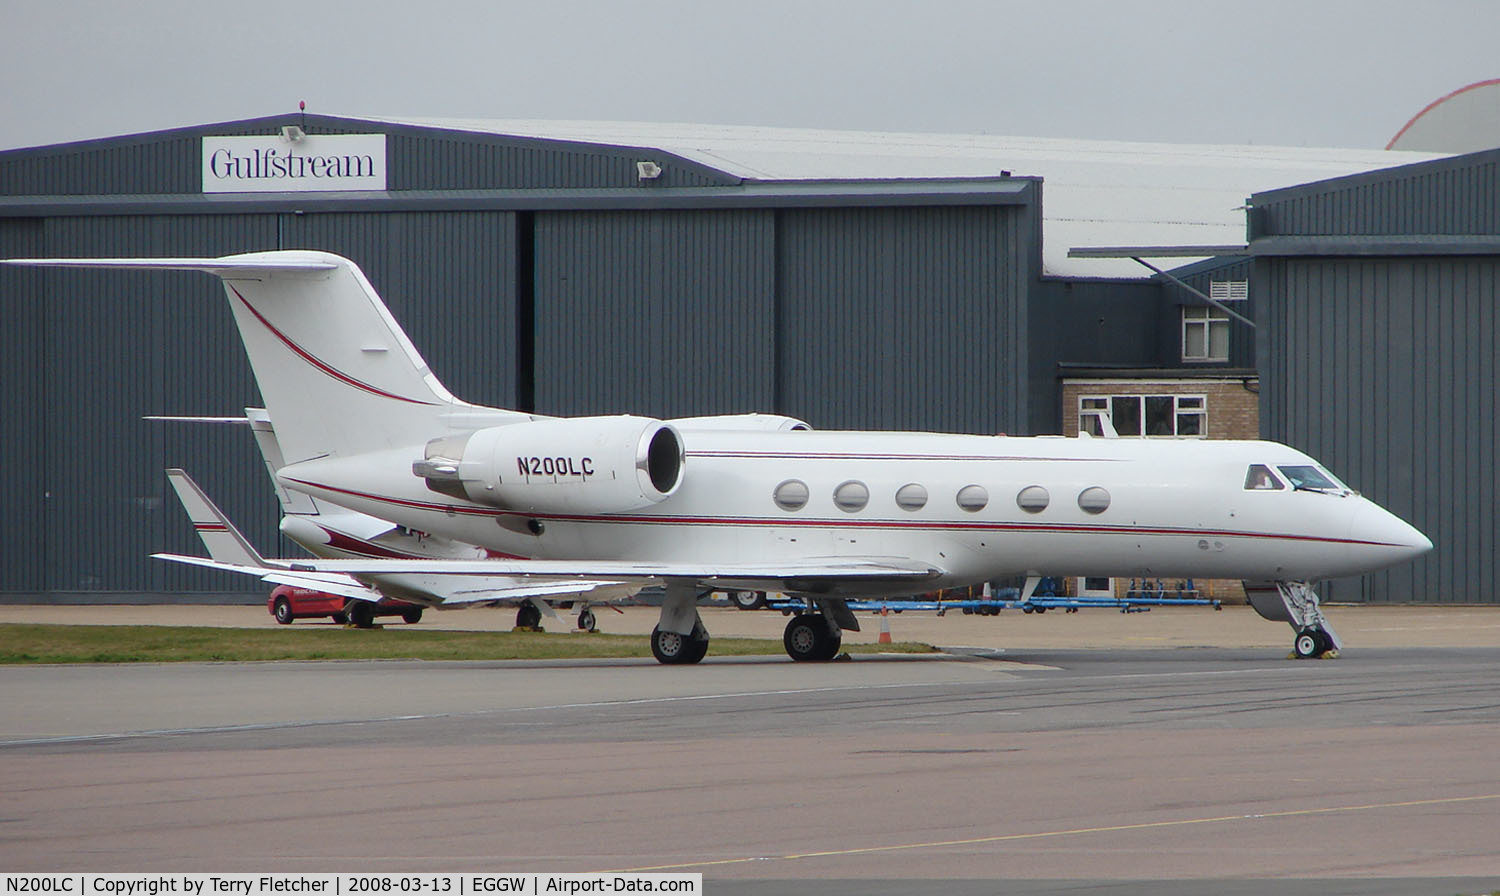 N200LC, 1988 Gulfstream Aerospace G-IV C/N 1067, Gulf IV about to depart Luton for Teterboro